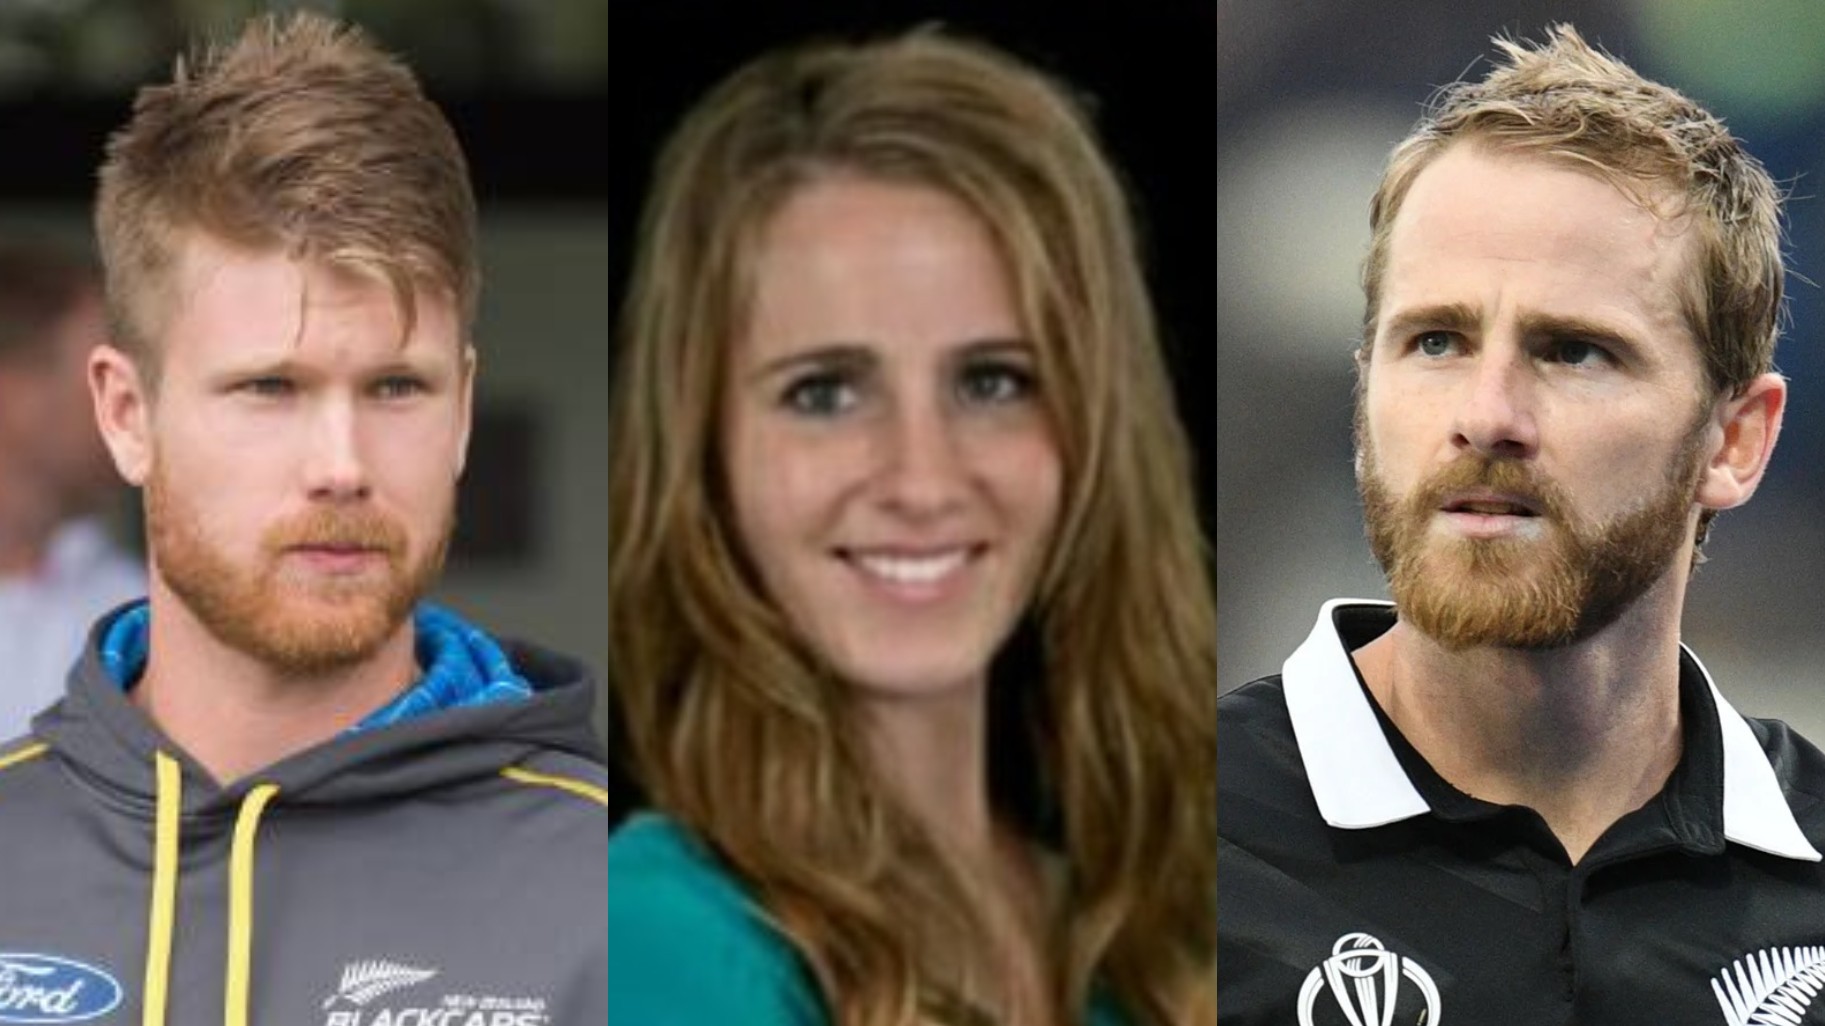 Jimmy Neesham says “Kane would be a ponytail kinda girl”, comments on Kiwi cricketers’ female versions